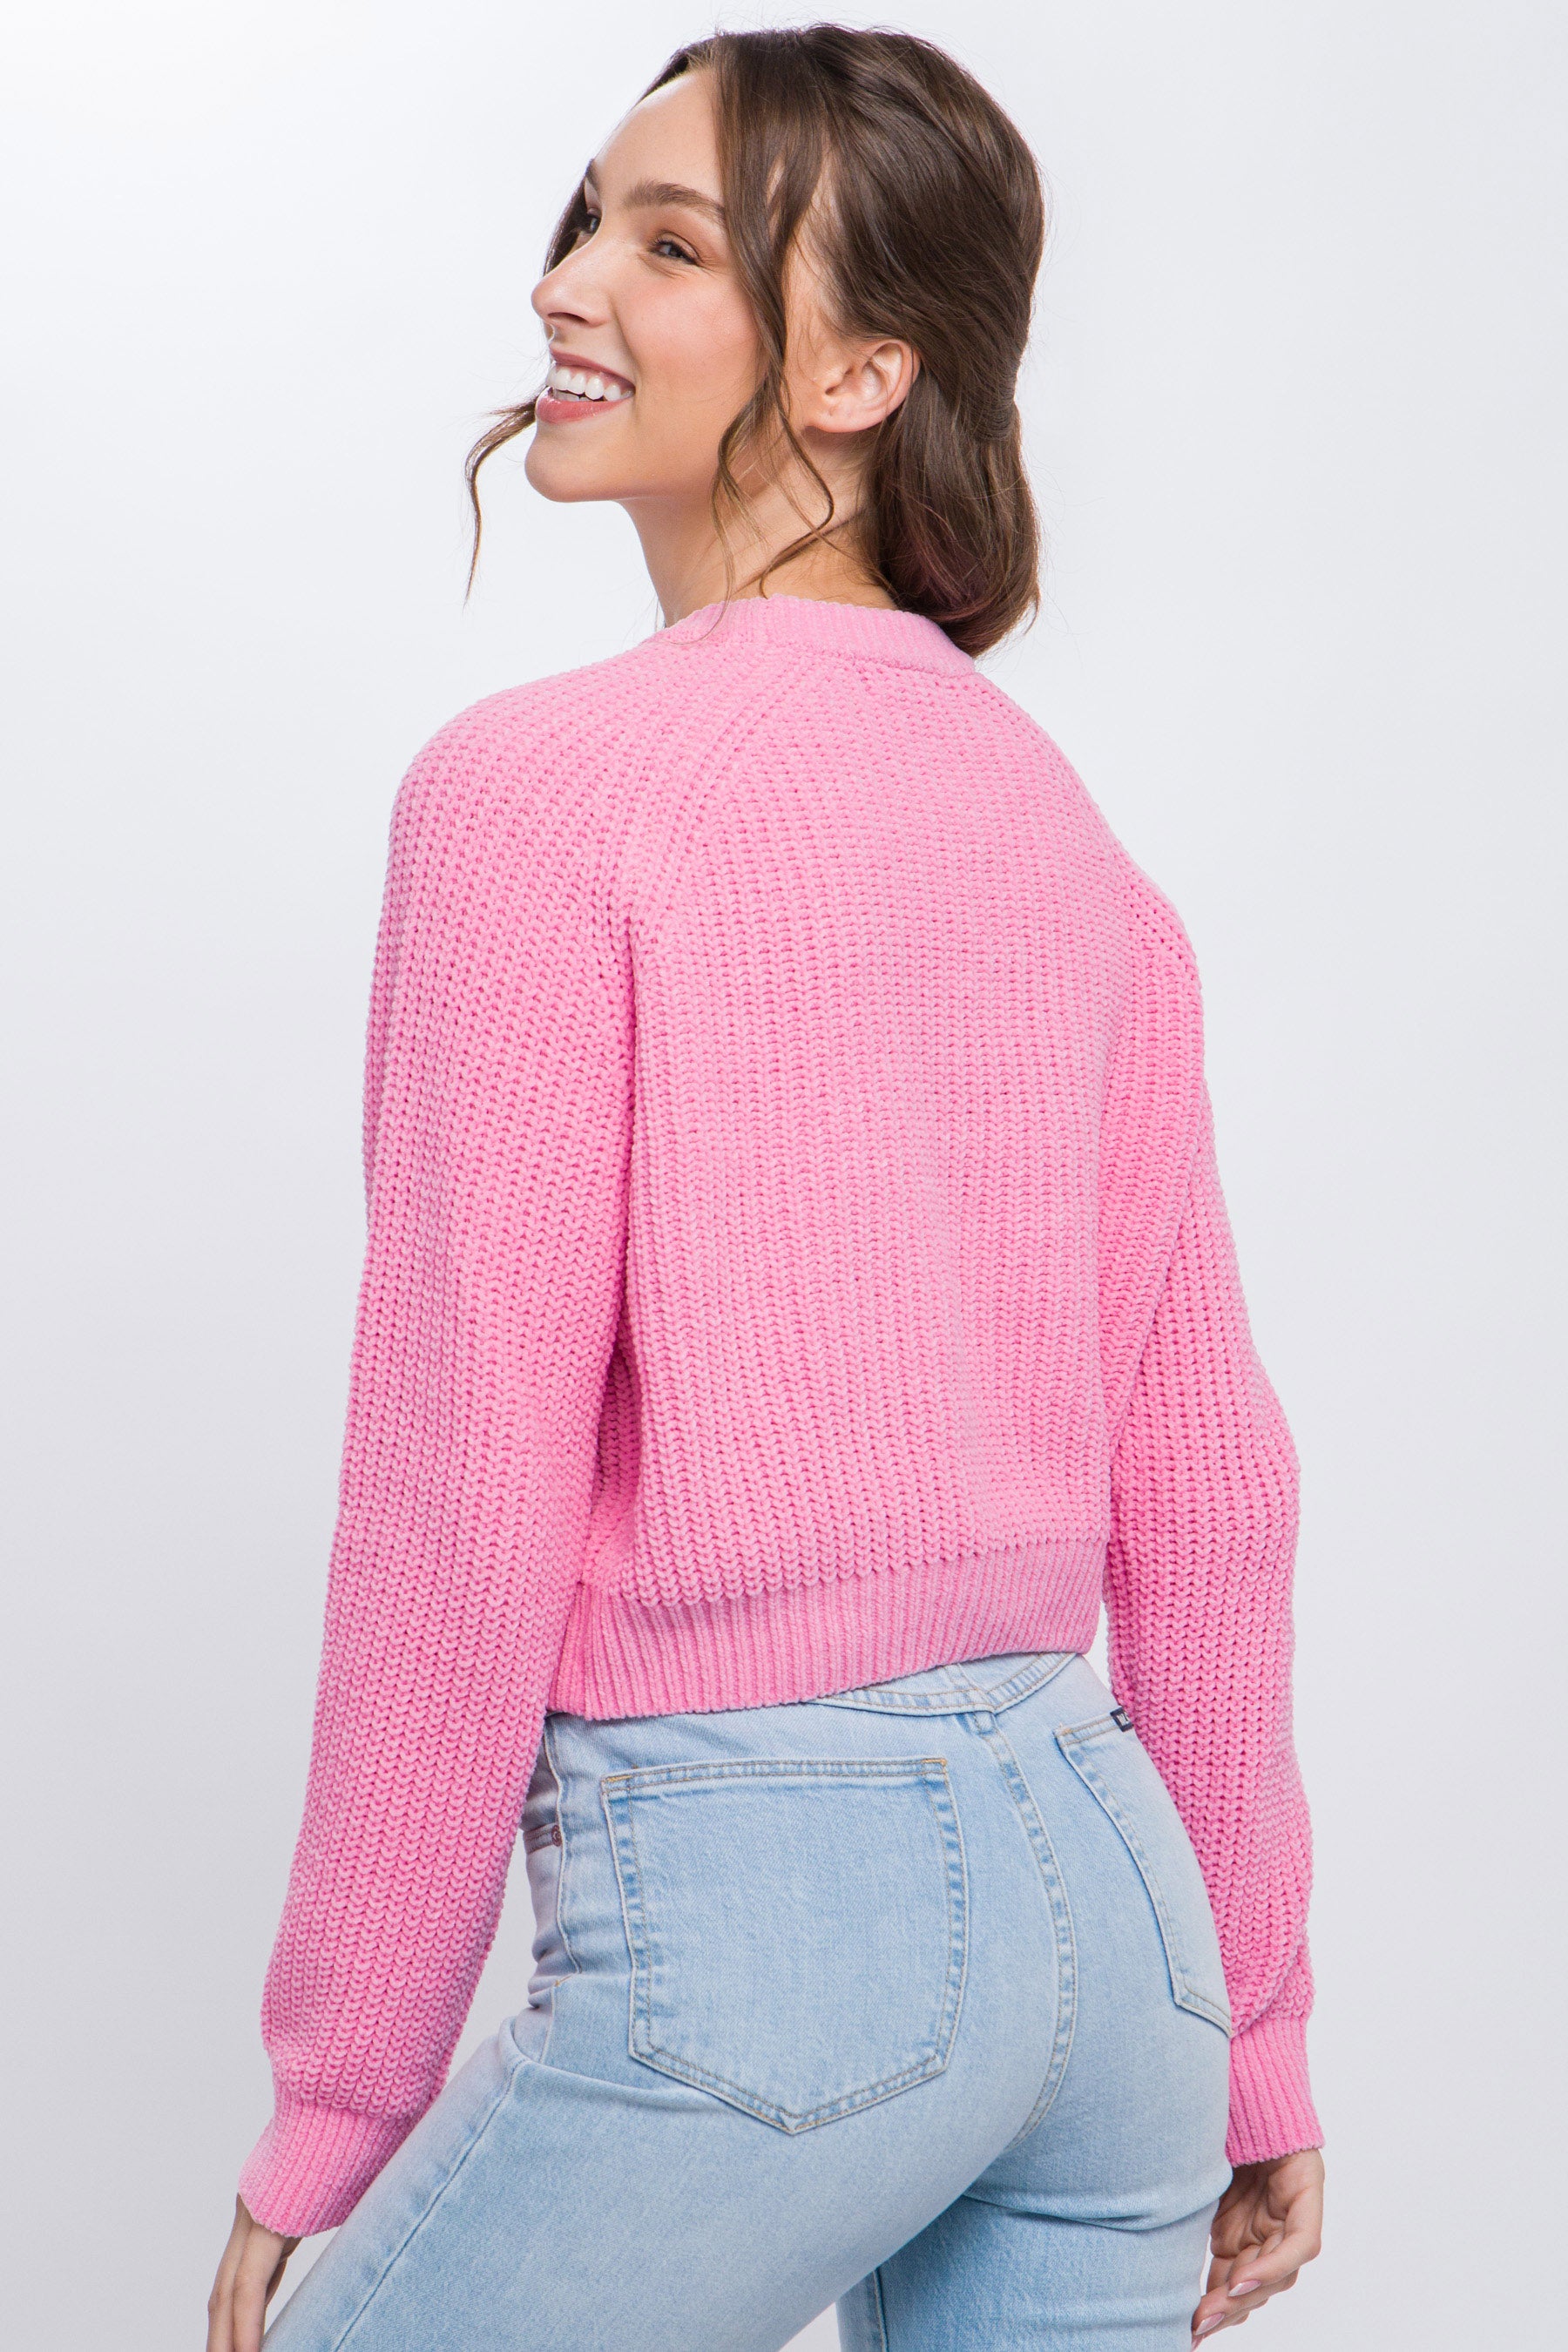 Knit Pullover Sweater With Cold Shoulder Detail - Body By J'ne